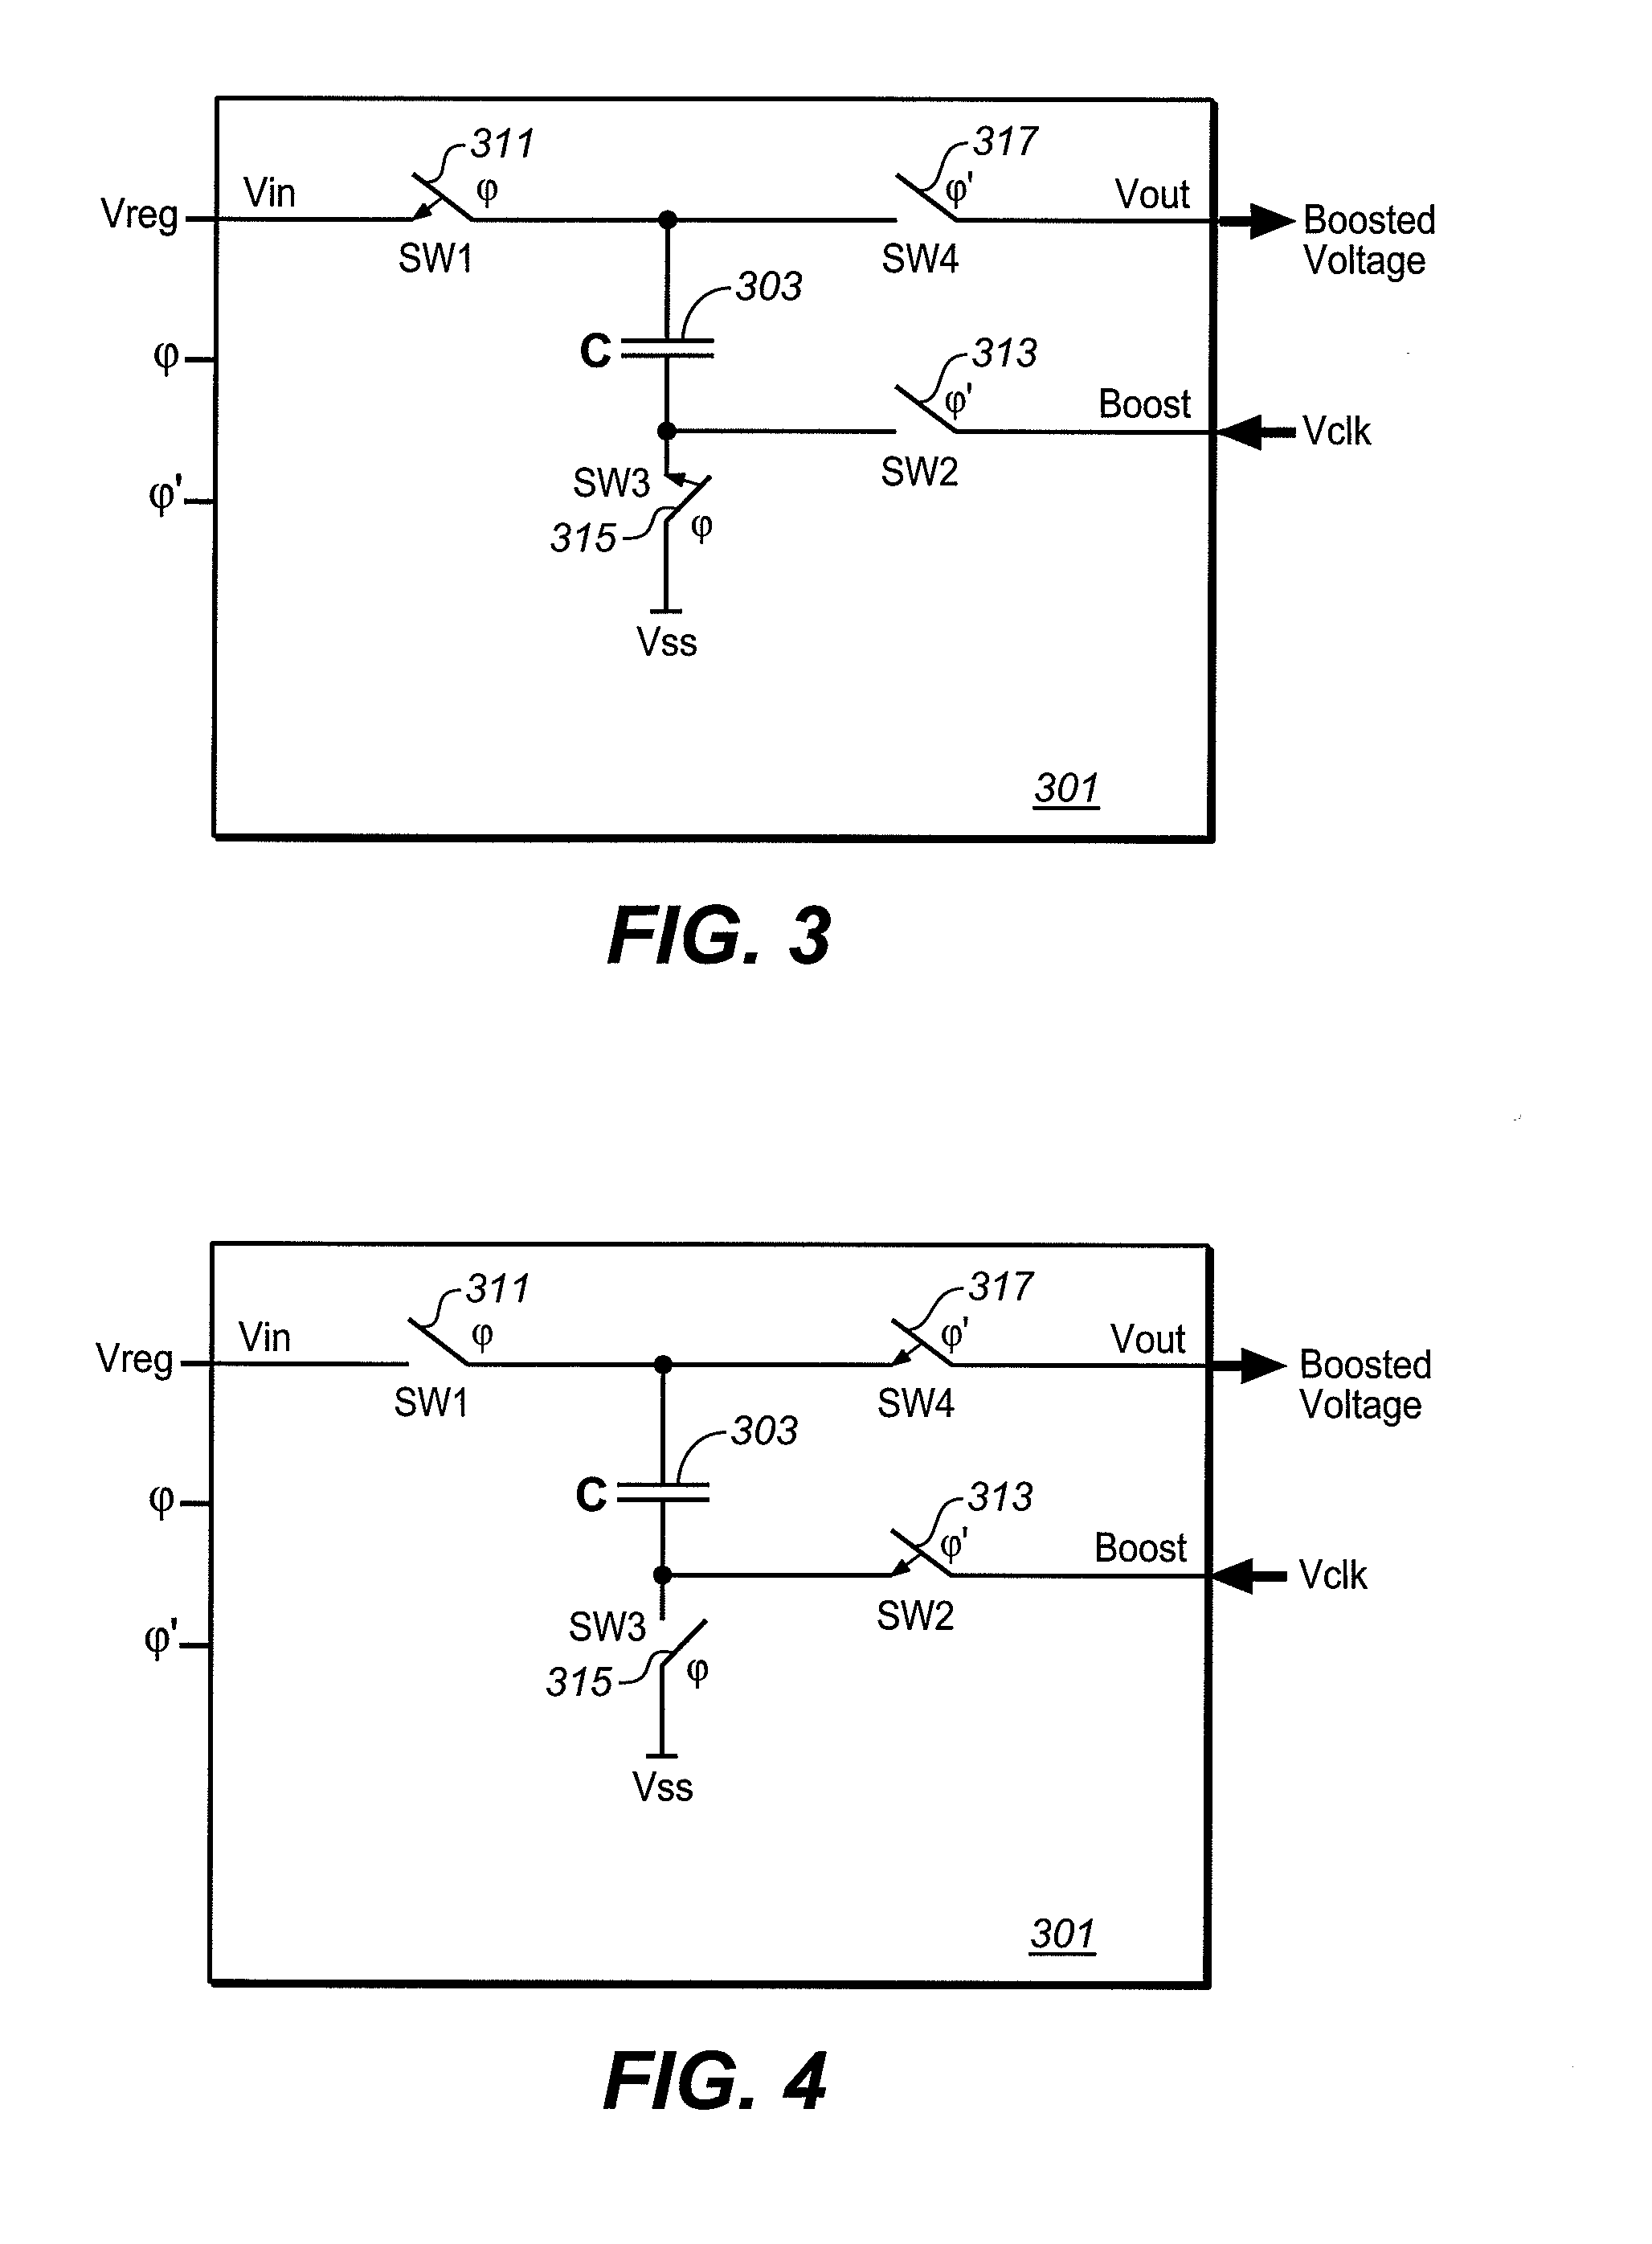 Bottom Plate Regulation of Charge Pumps